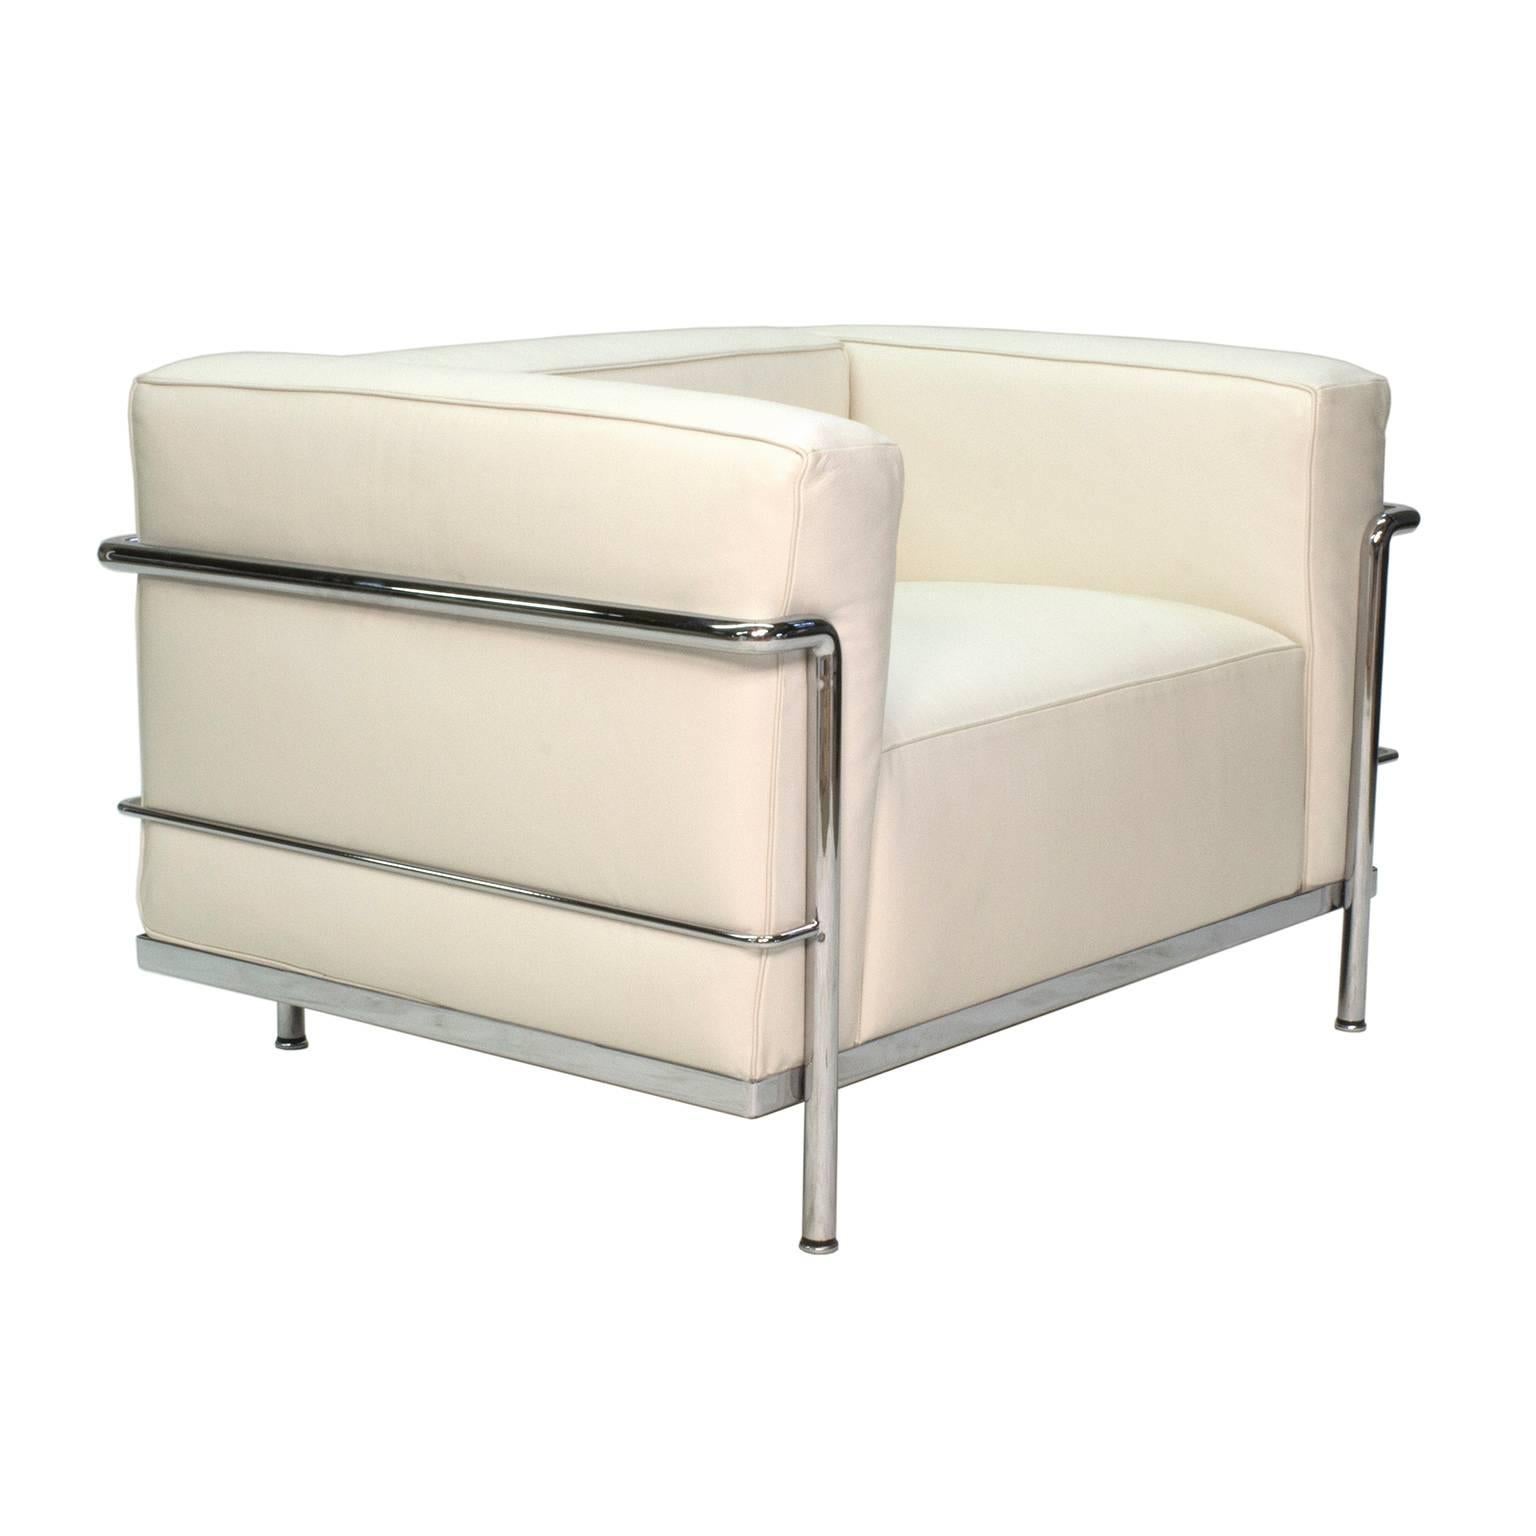 Four cushions, free of connections, are held within a lacquered or chrome-plated steeltube cage making up the primary support of the object. 003 10.